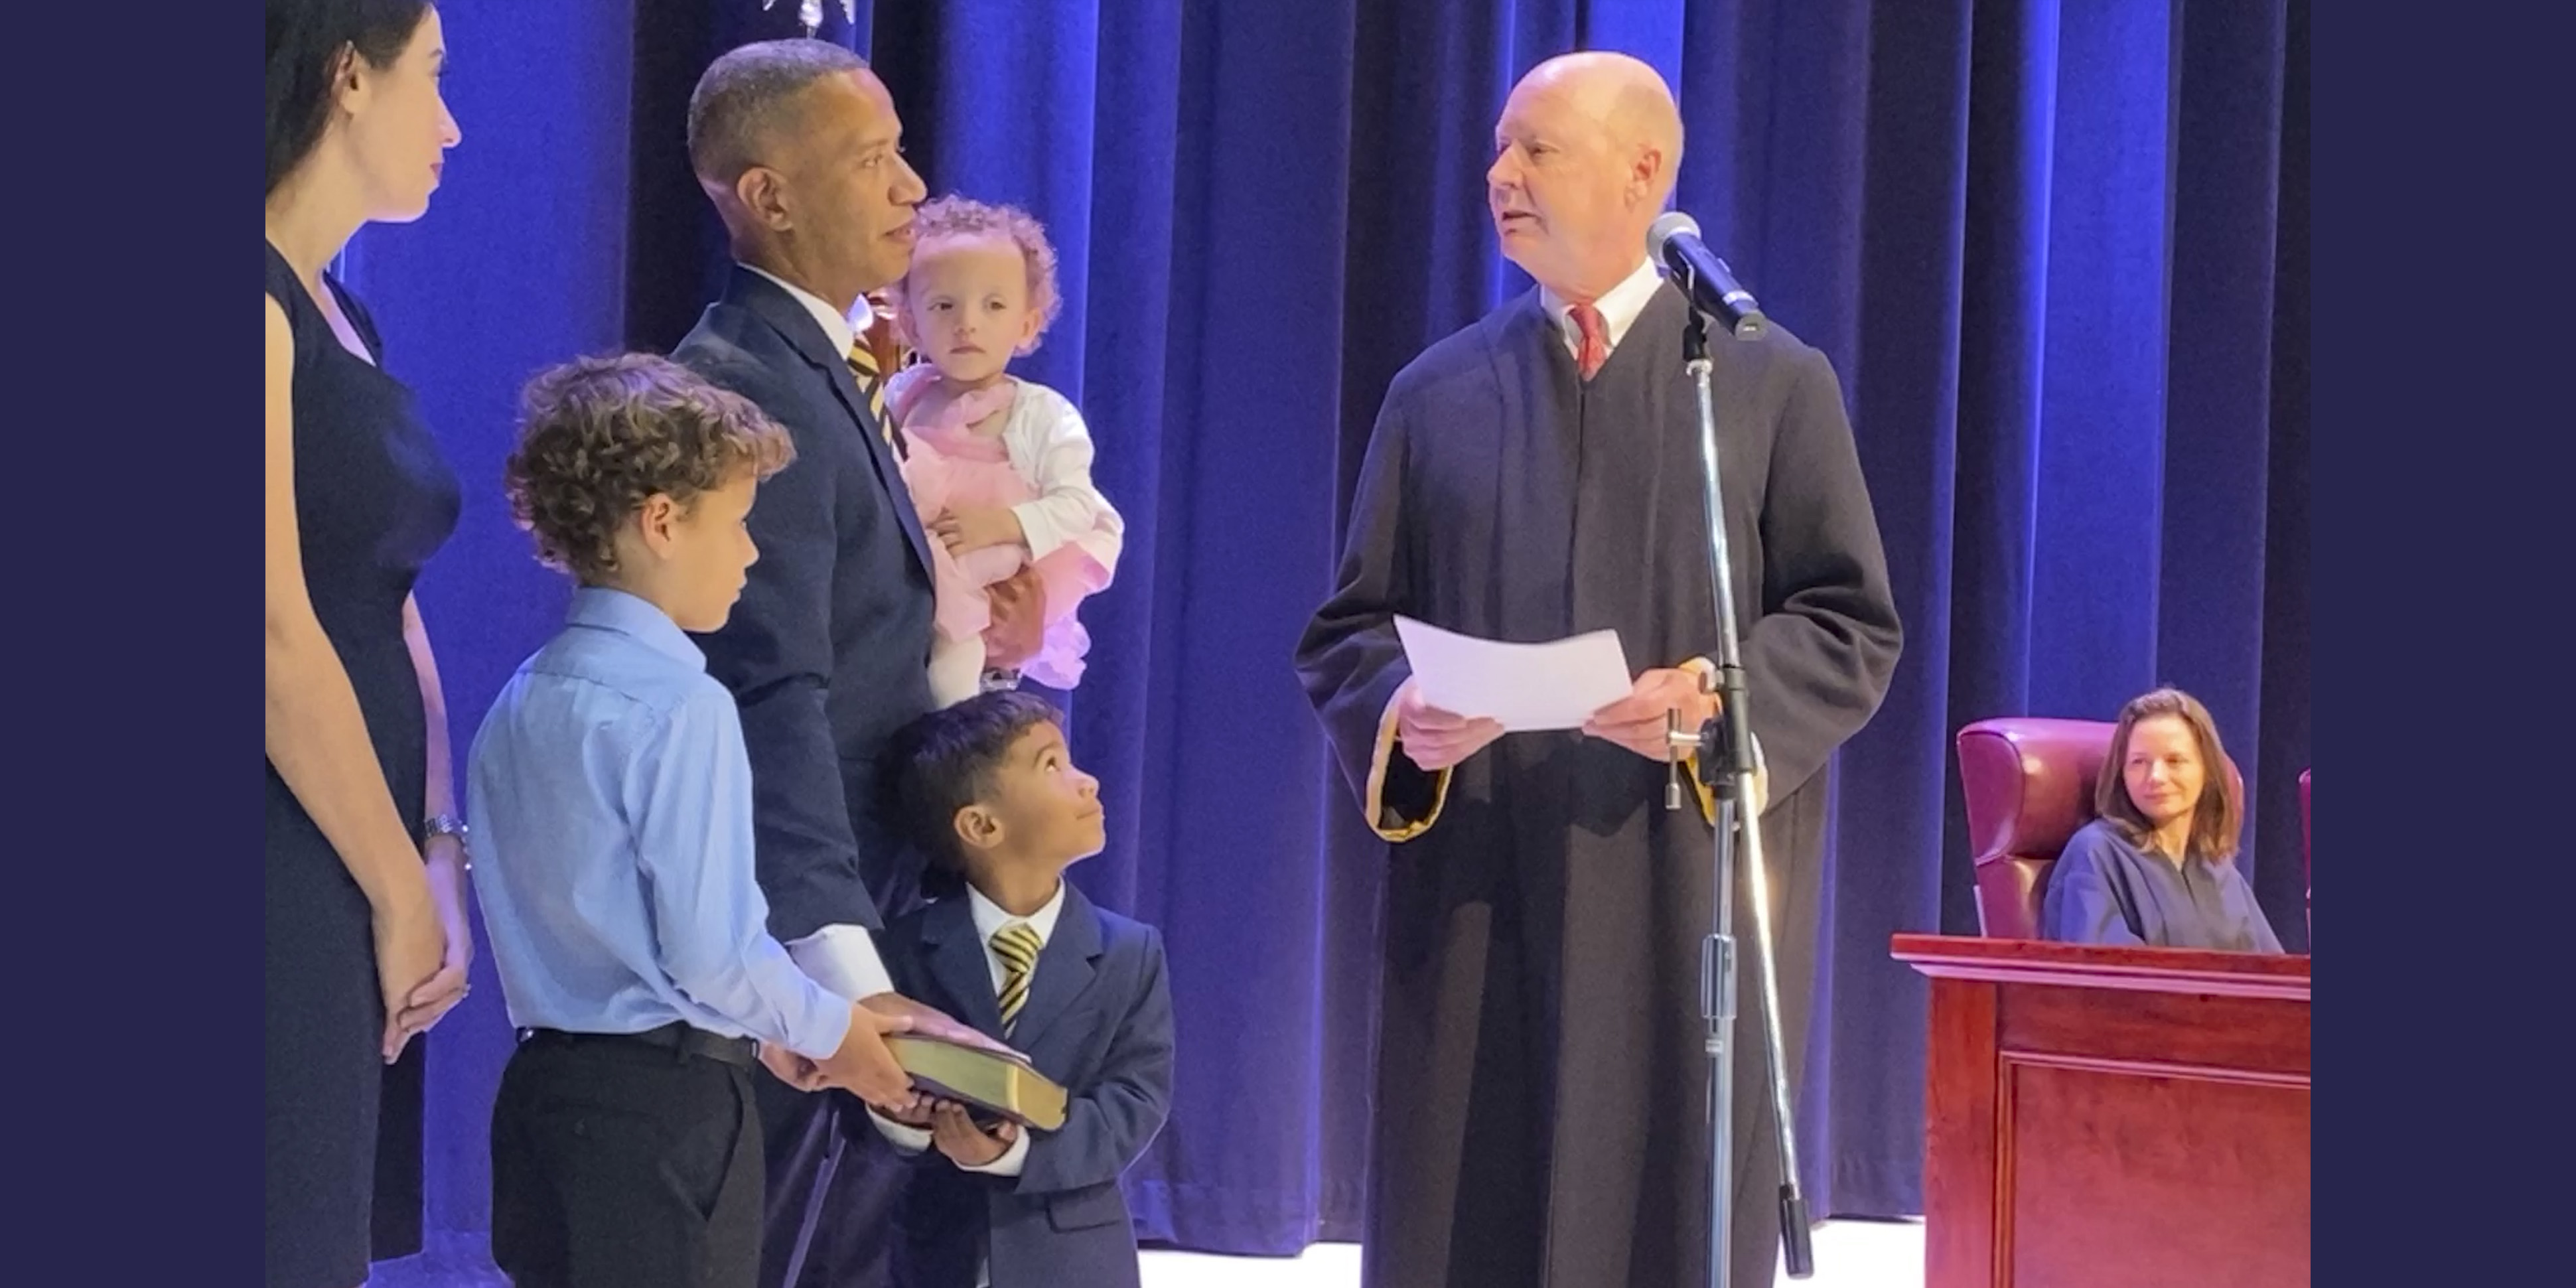 The Honorable N. Christopher Griffiths takes the Oath of Office for Justice of the Supreme Court of Delaware